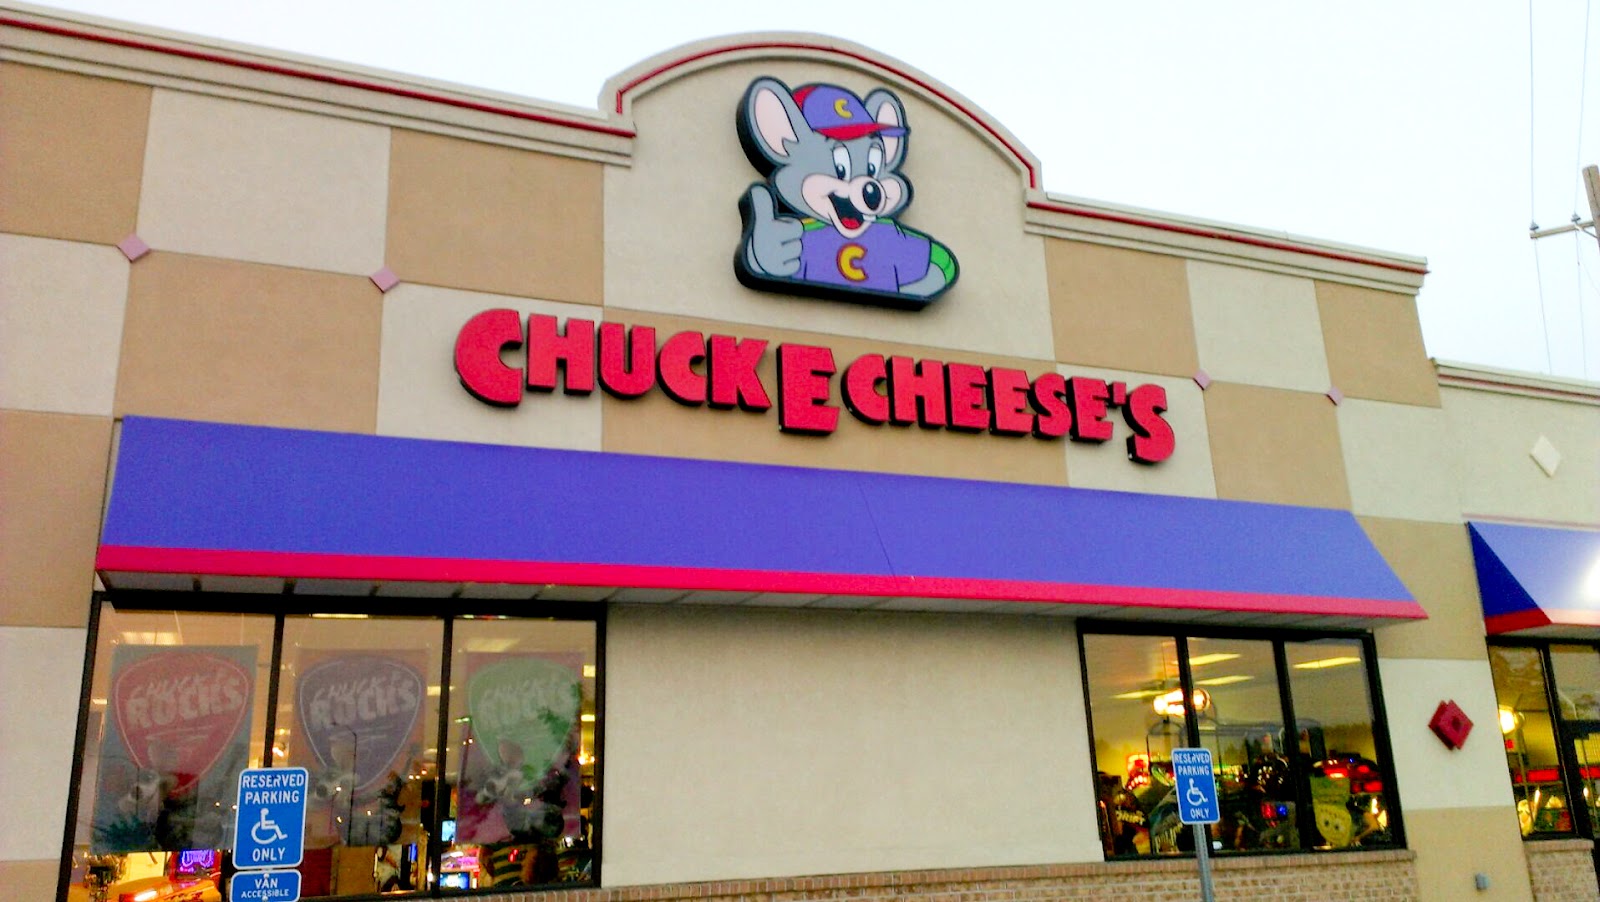 Celebrate Helen s Birthday with Chuck E Cheese s Enter the sweepstakes and giveaway too